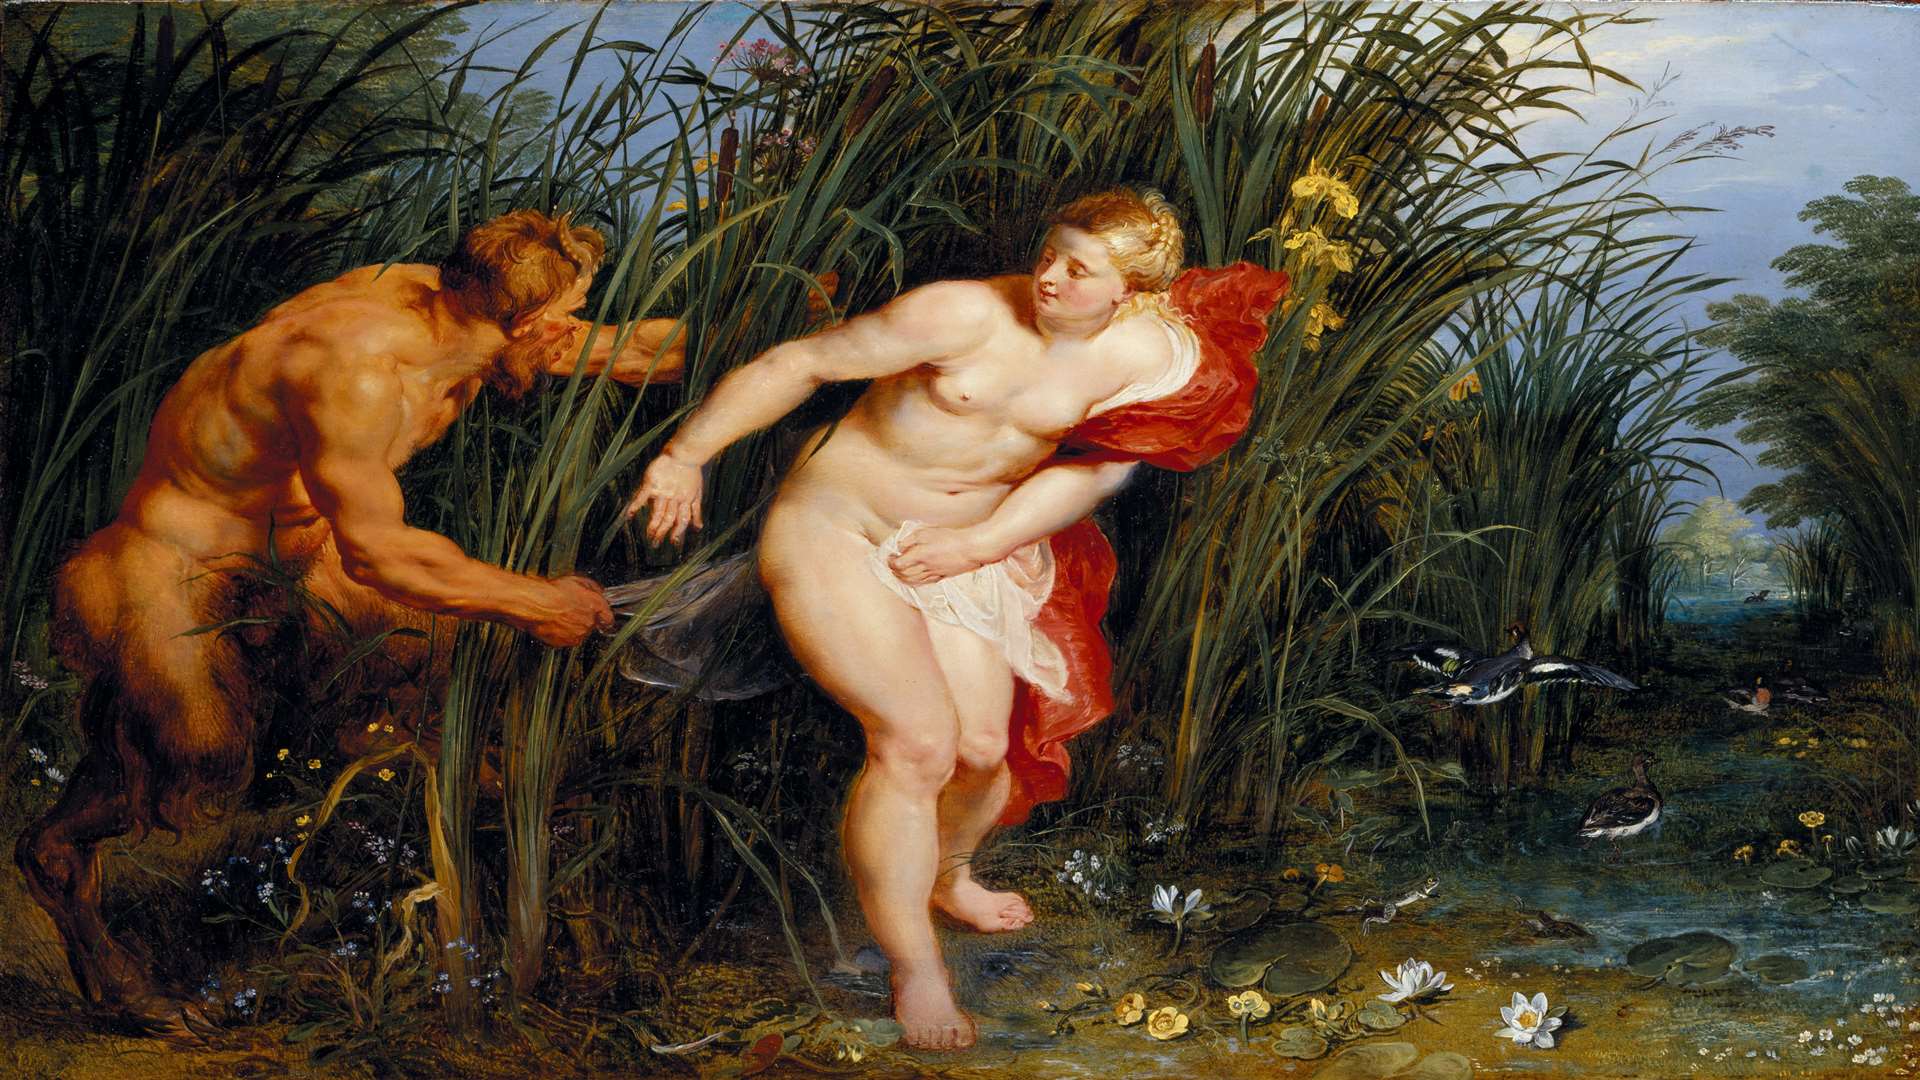 Pan and Syrinx by Rubens - painted in 1617